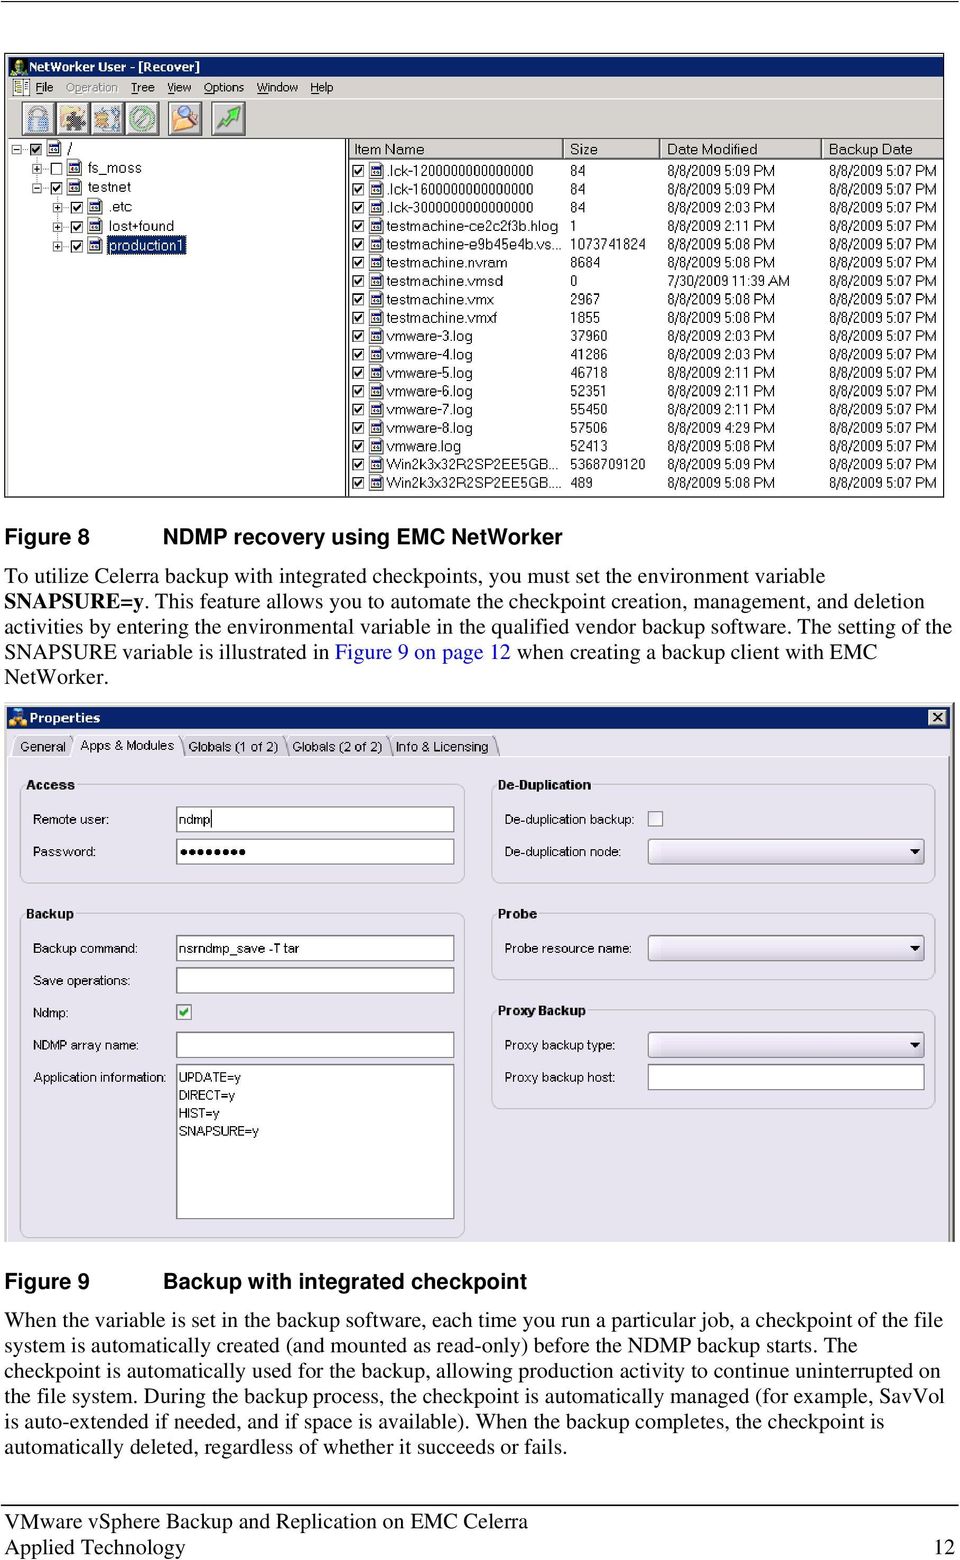 The setting of the SNAPSURE variable is illustrated in Figure 9 on page 12 when creating a backup client with EMC NetWorker.